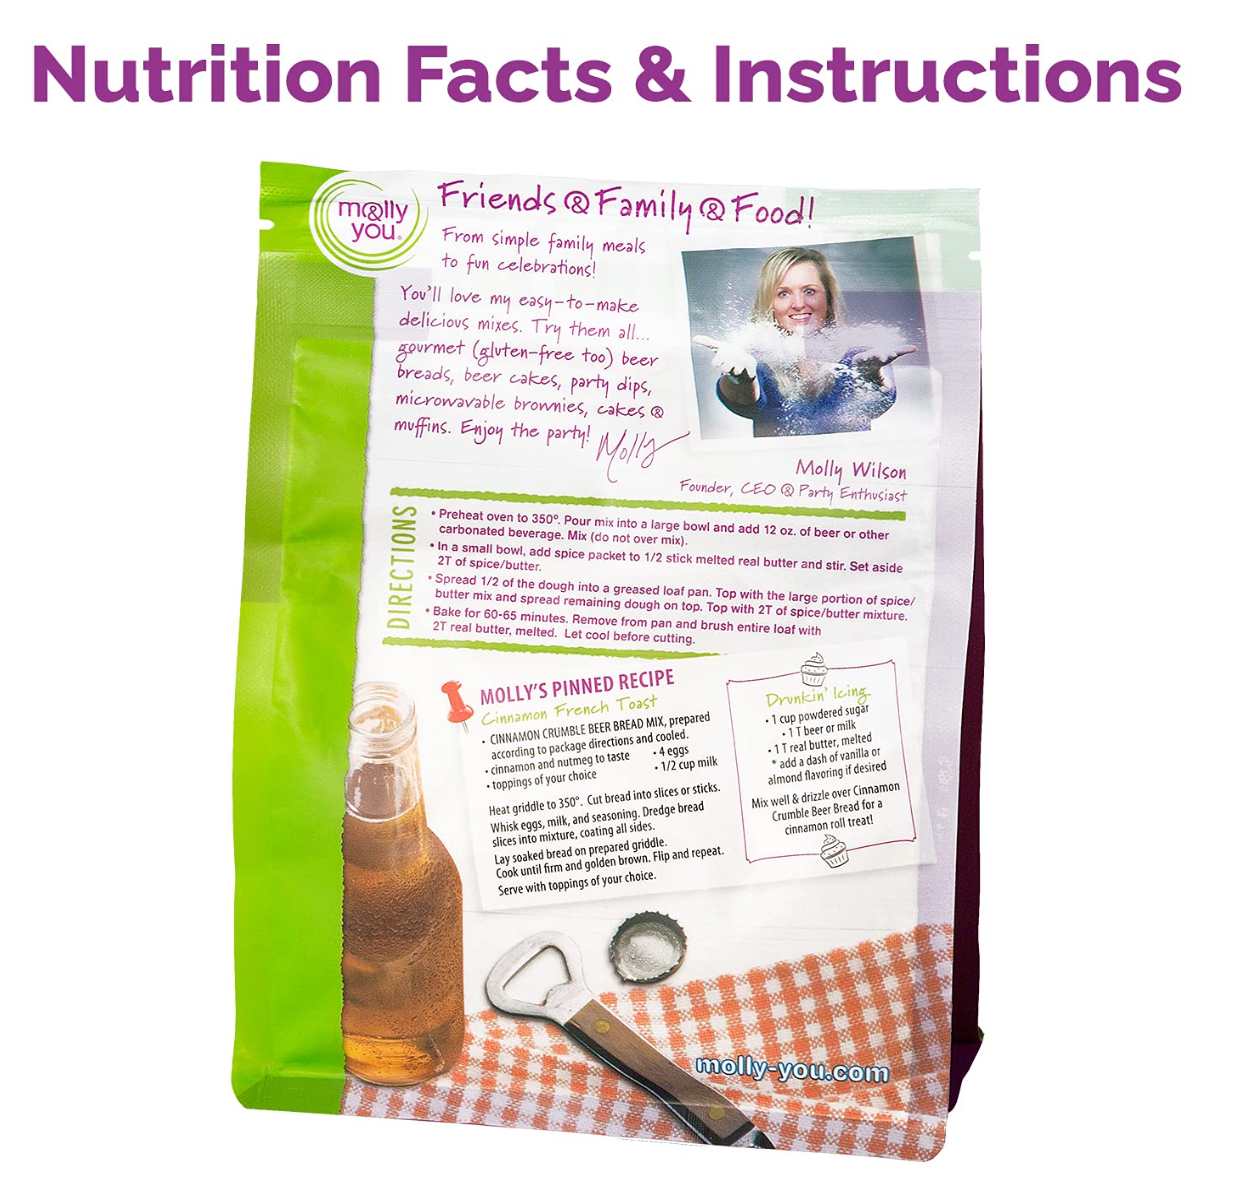 Nutrition Faces & Instructions for our Cinnamon Crumble Beer Bread Mix